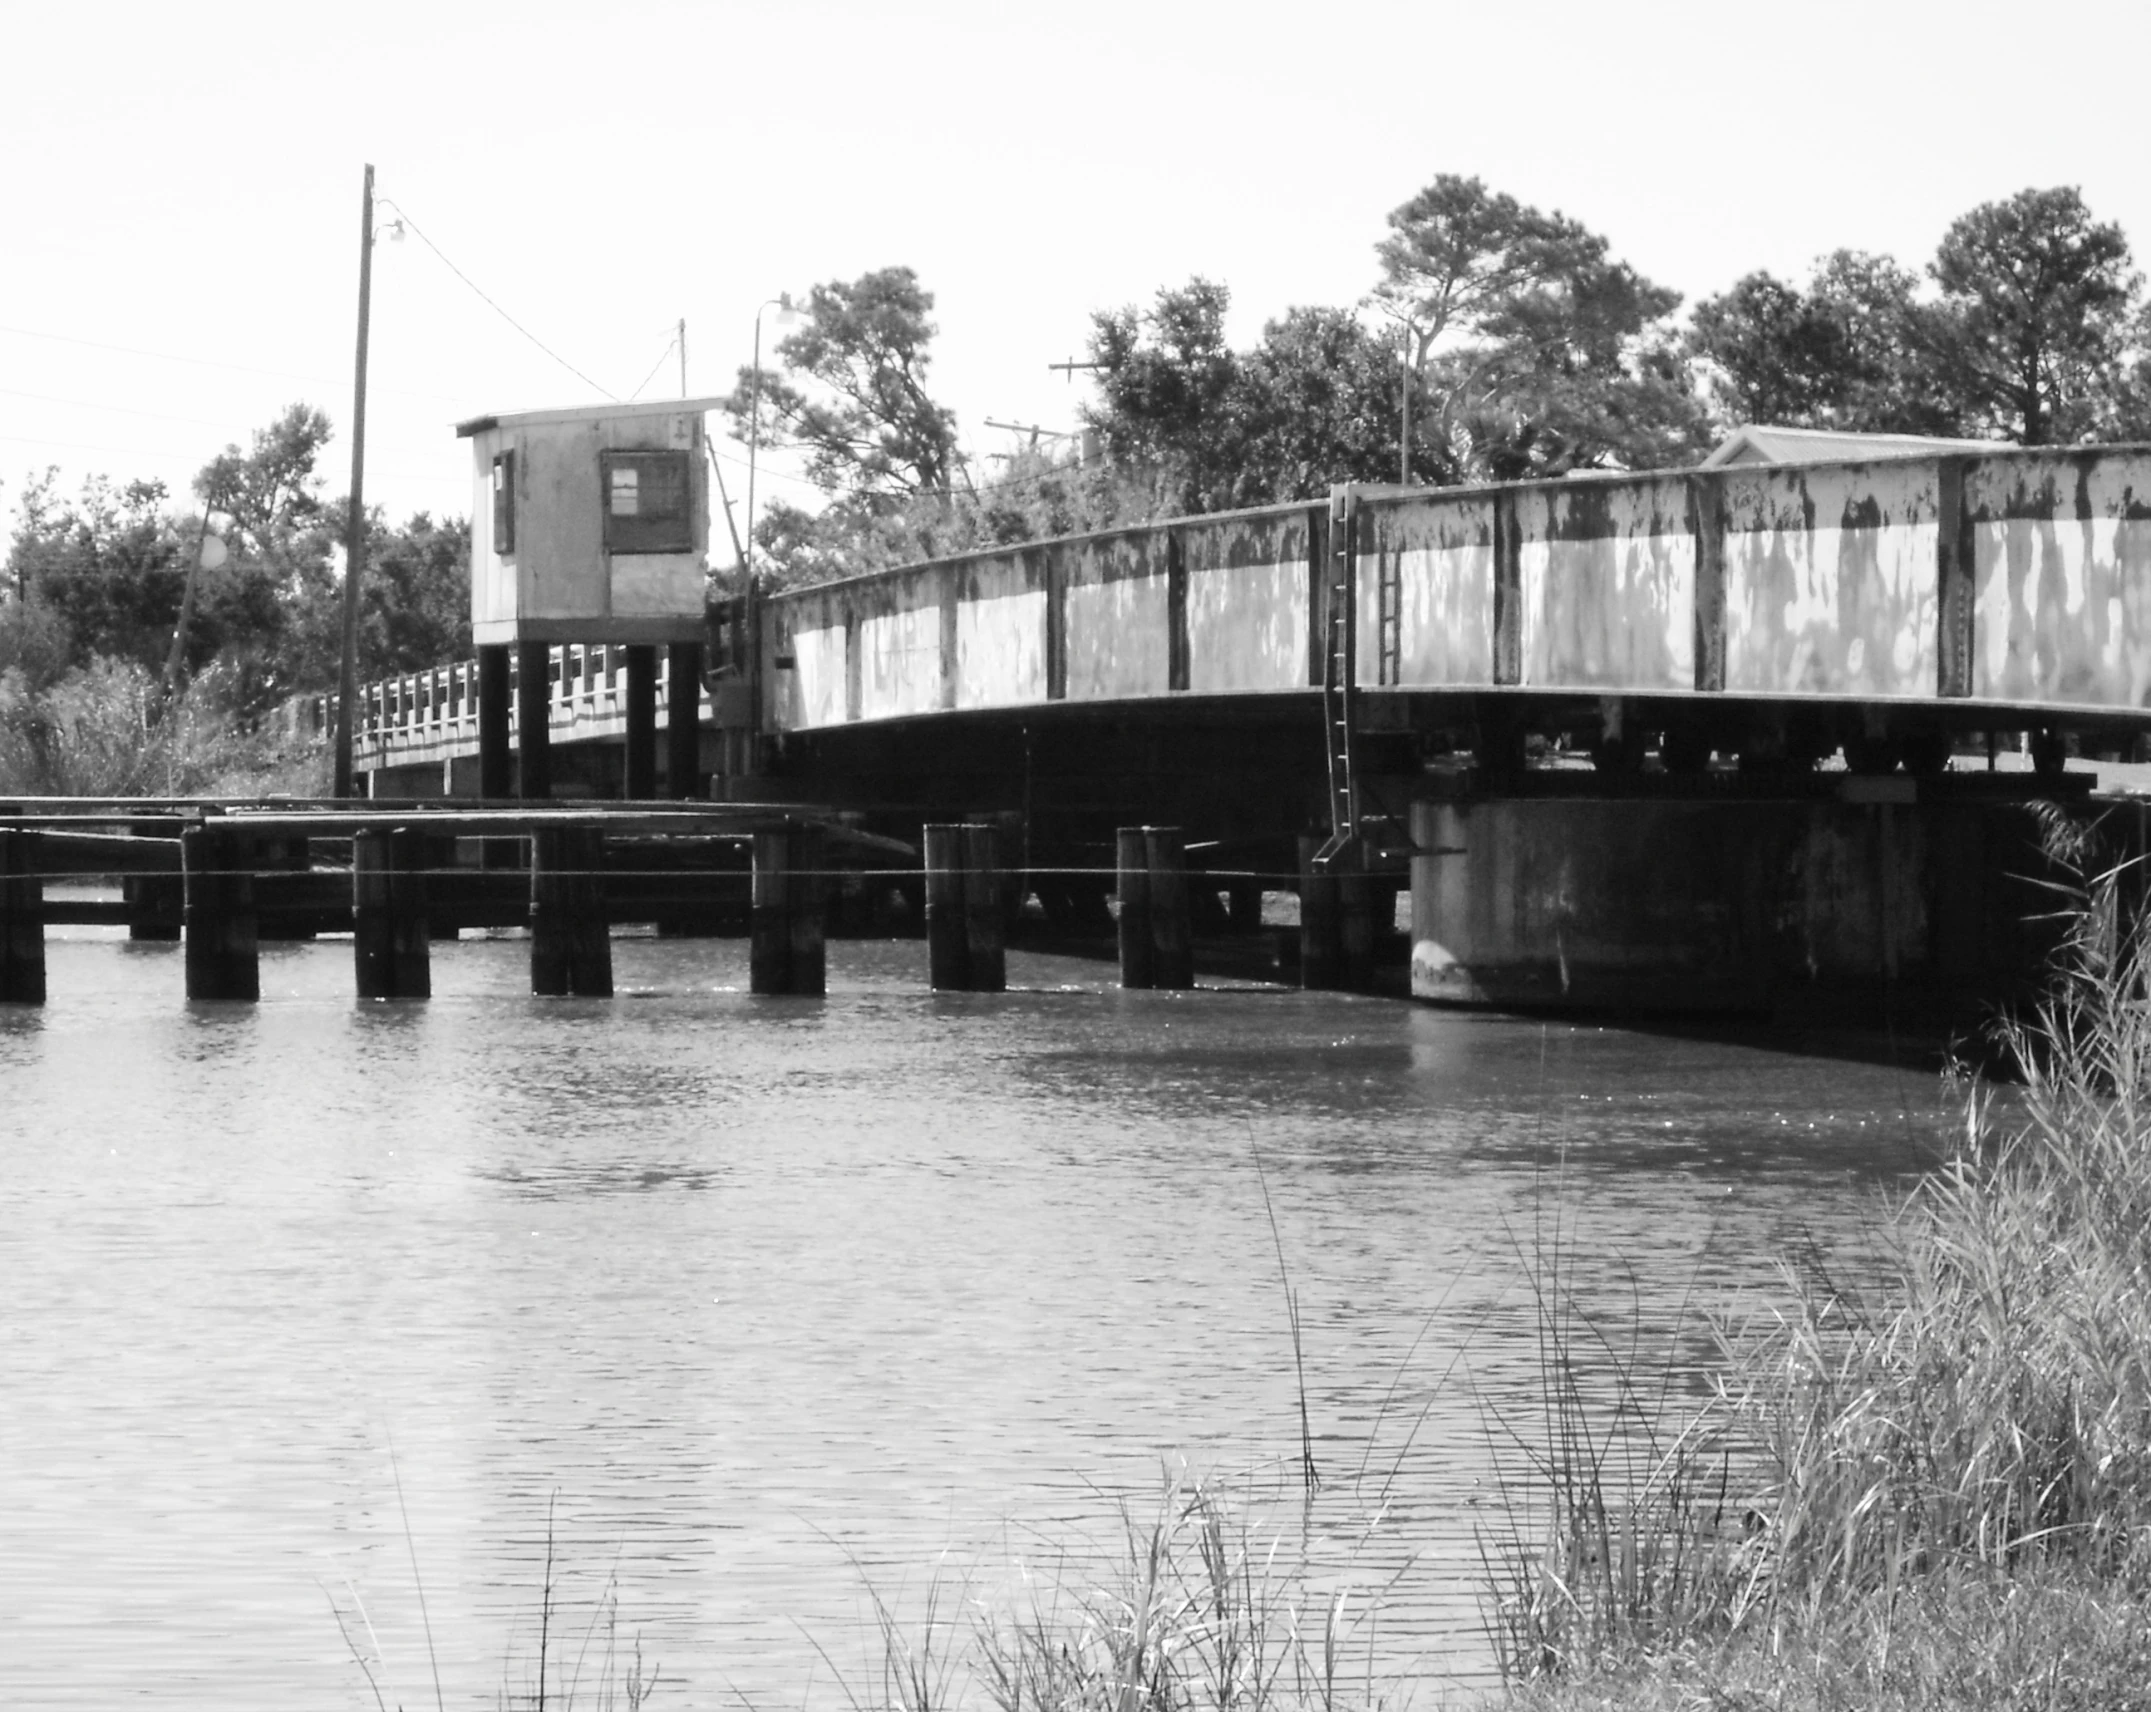 the train is crossing the overpass bridge over the water